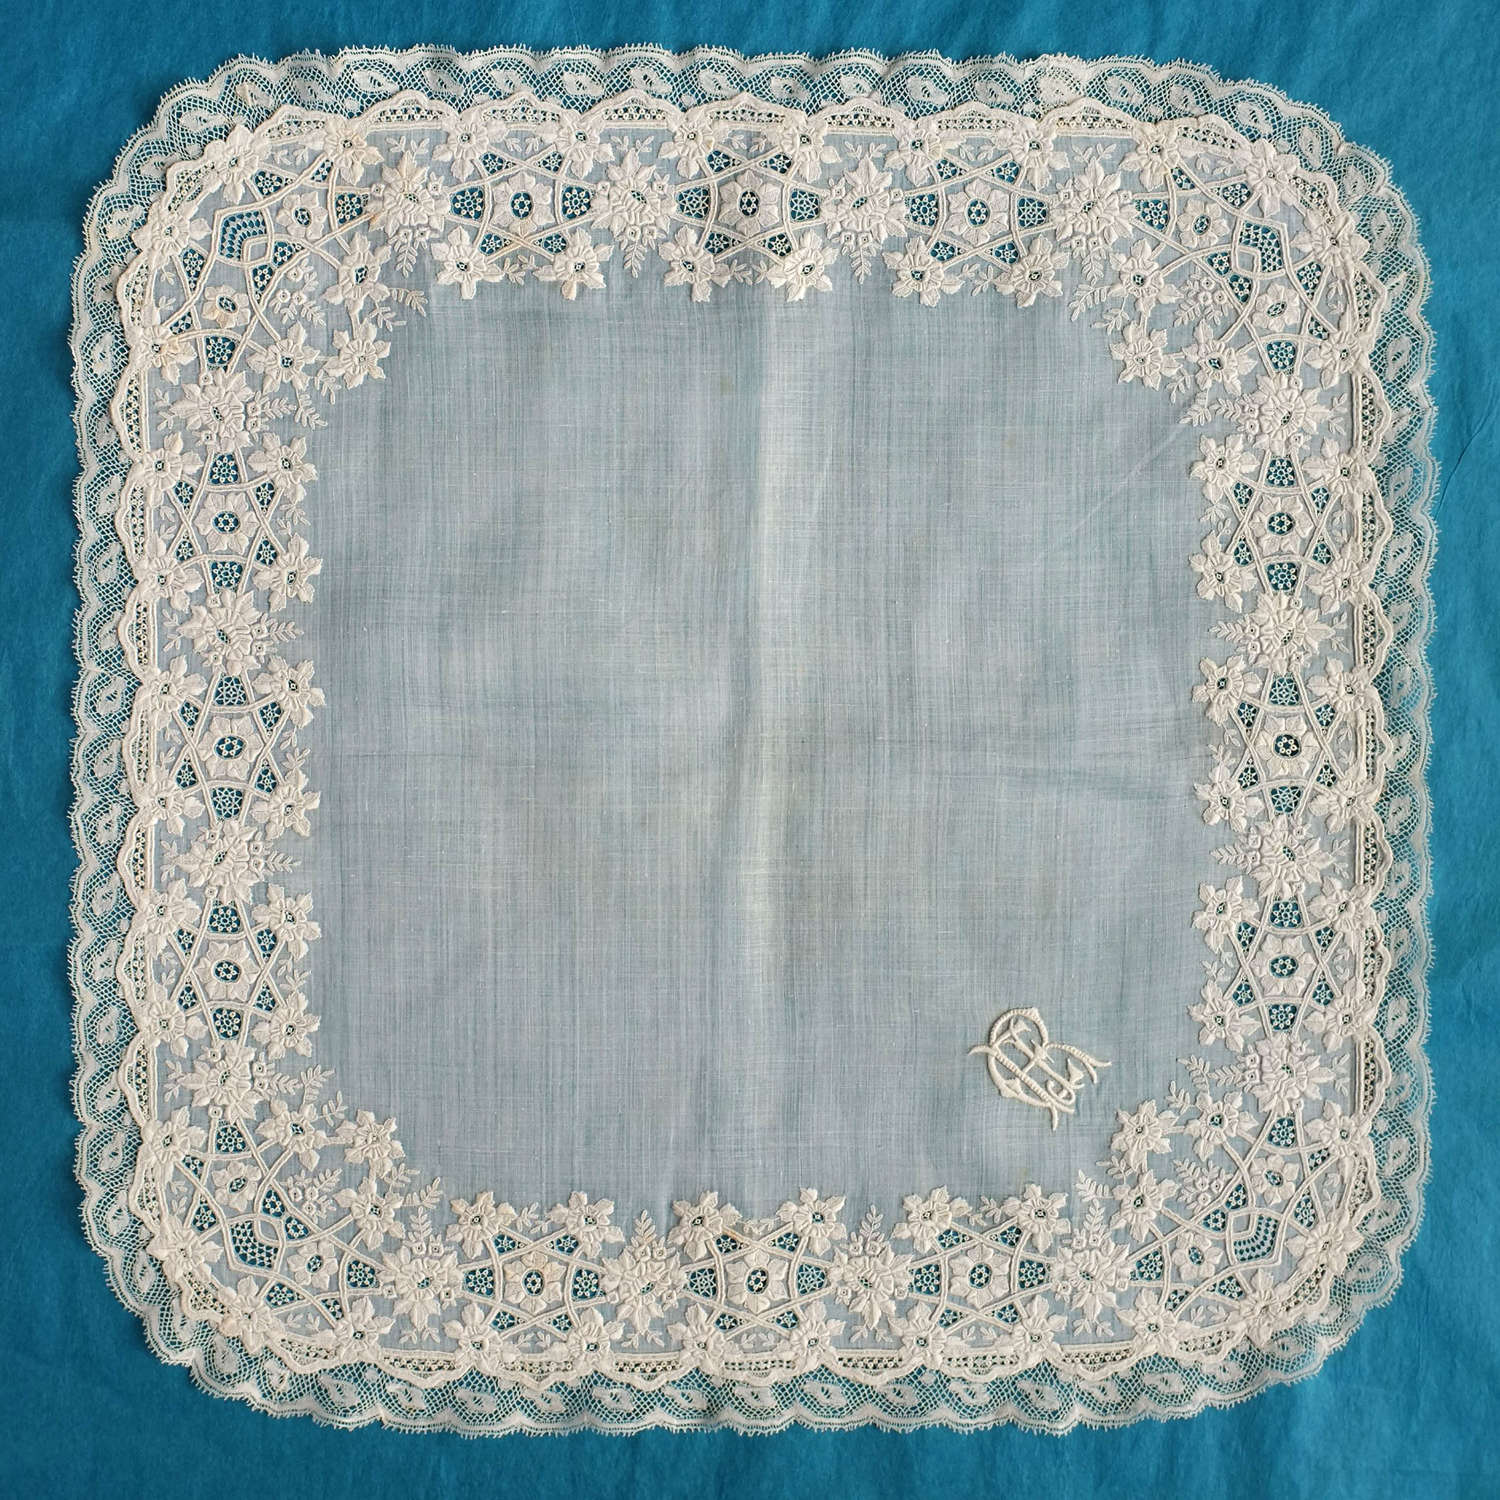 19th Century Flower Embroidered  Handkerchief with Lace Border